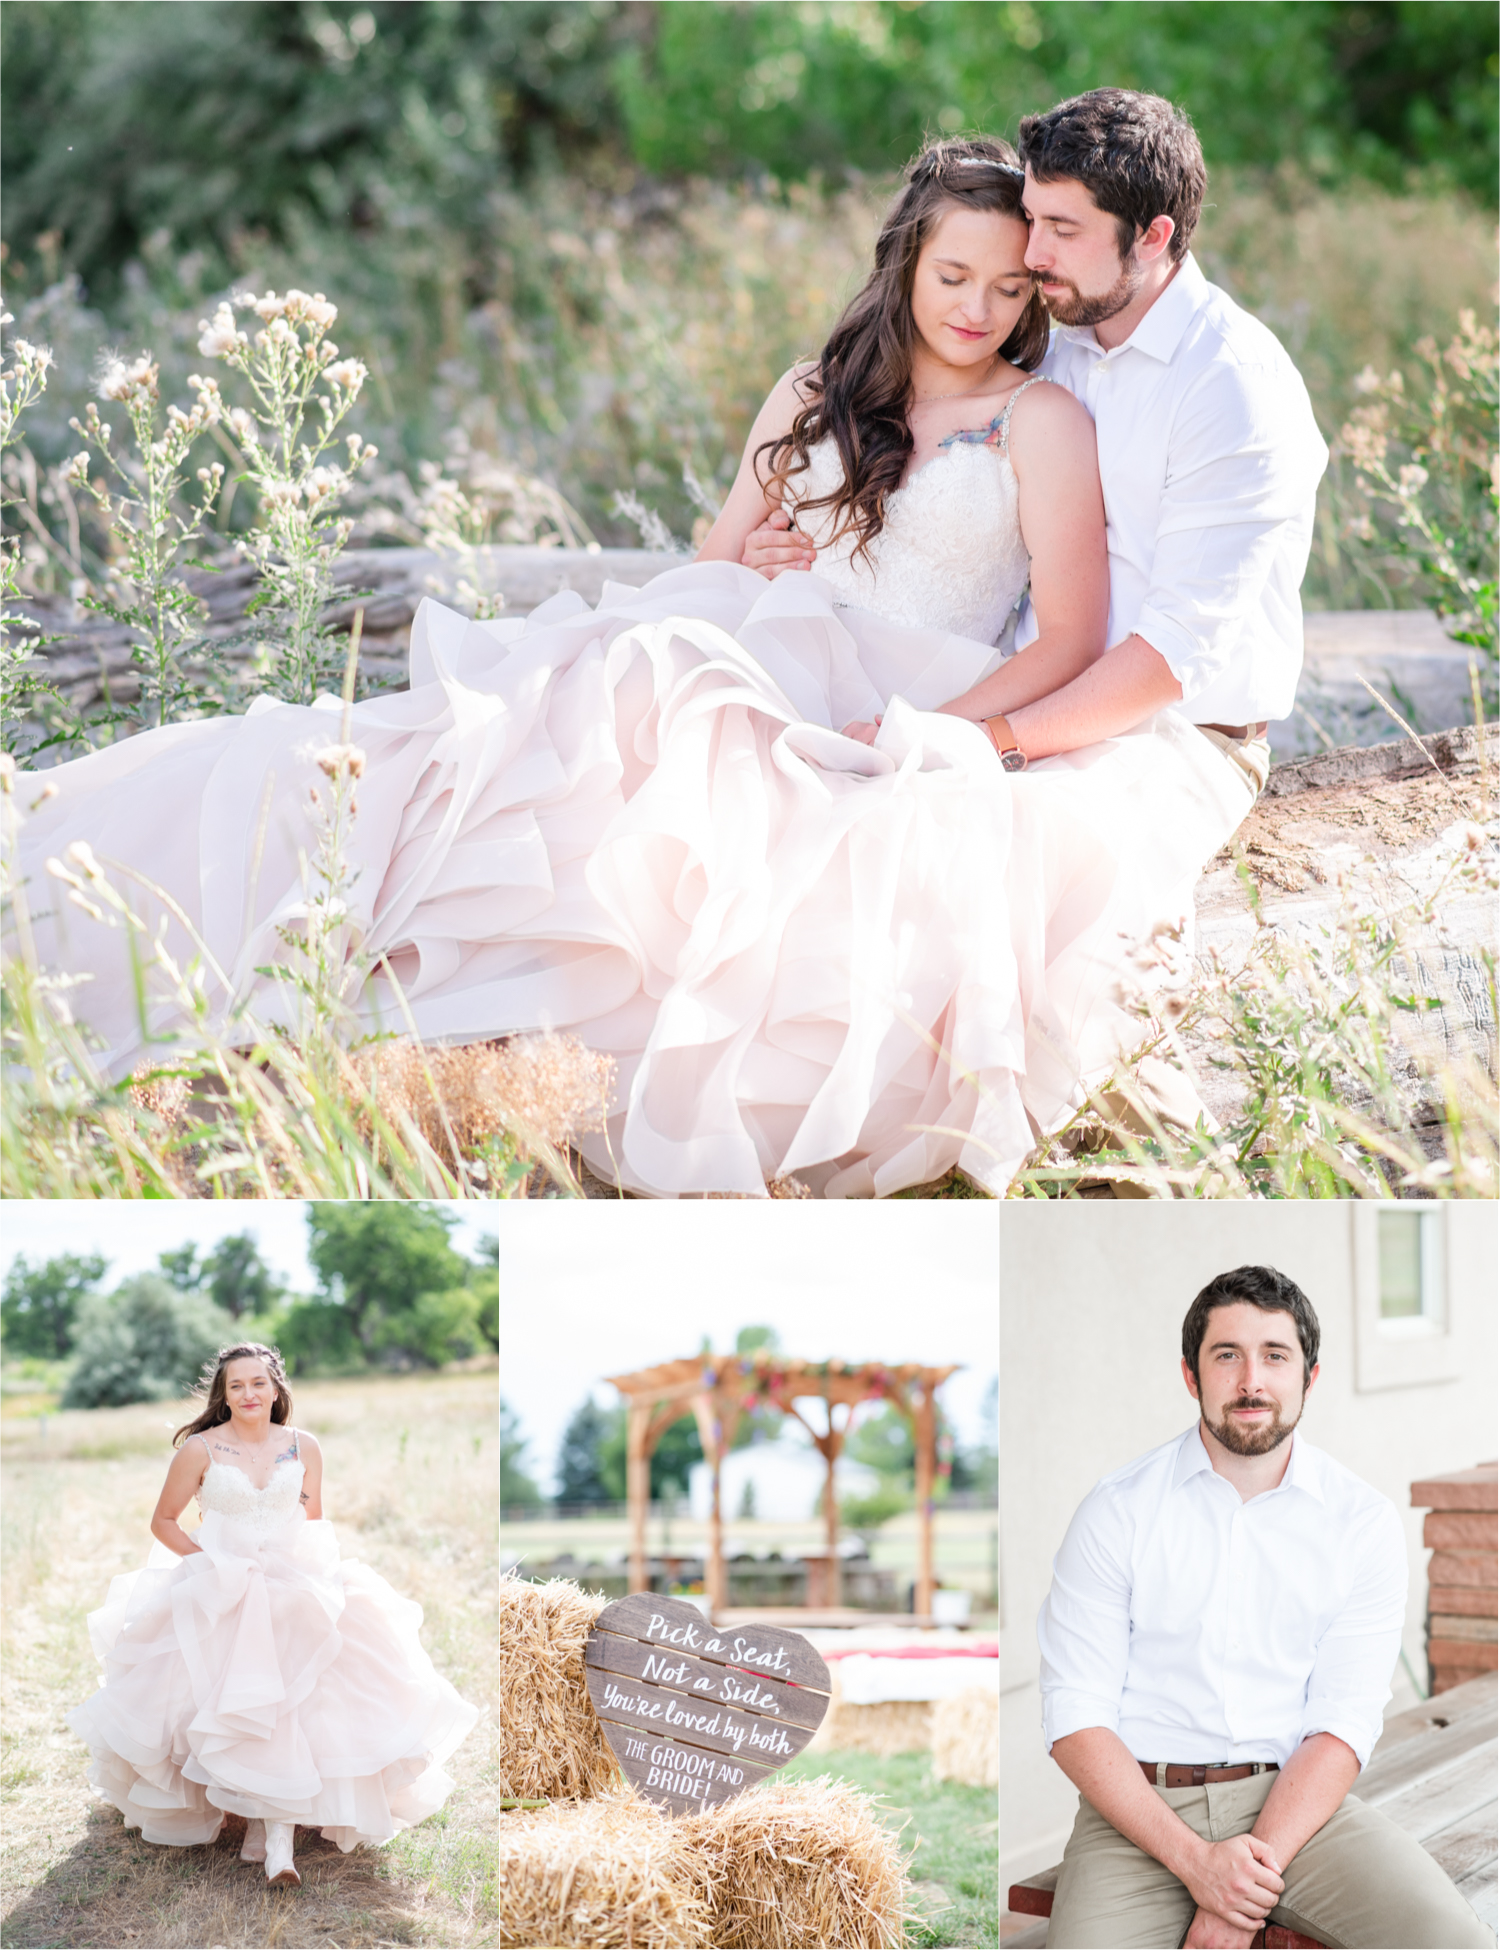 ustic Country Glam Wedding during Summer in Northern Colorado with first look and a romantic country dance | Britni Girard Photography - Greeley, Colorado